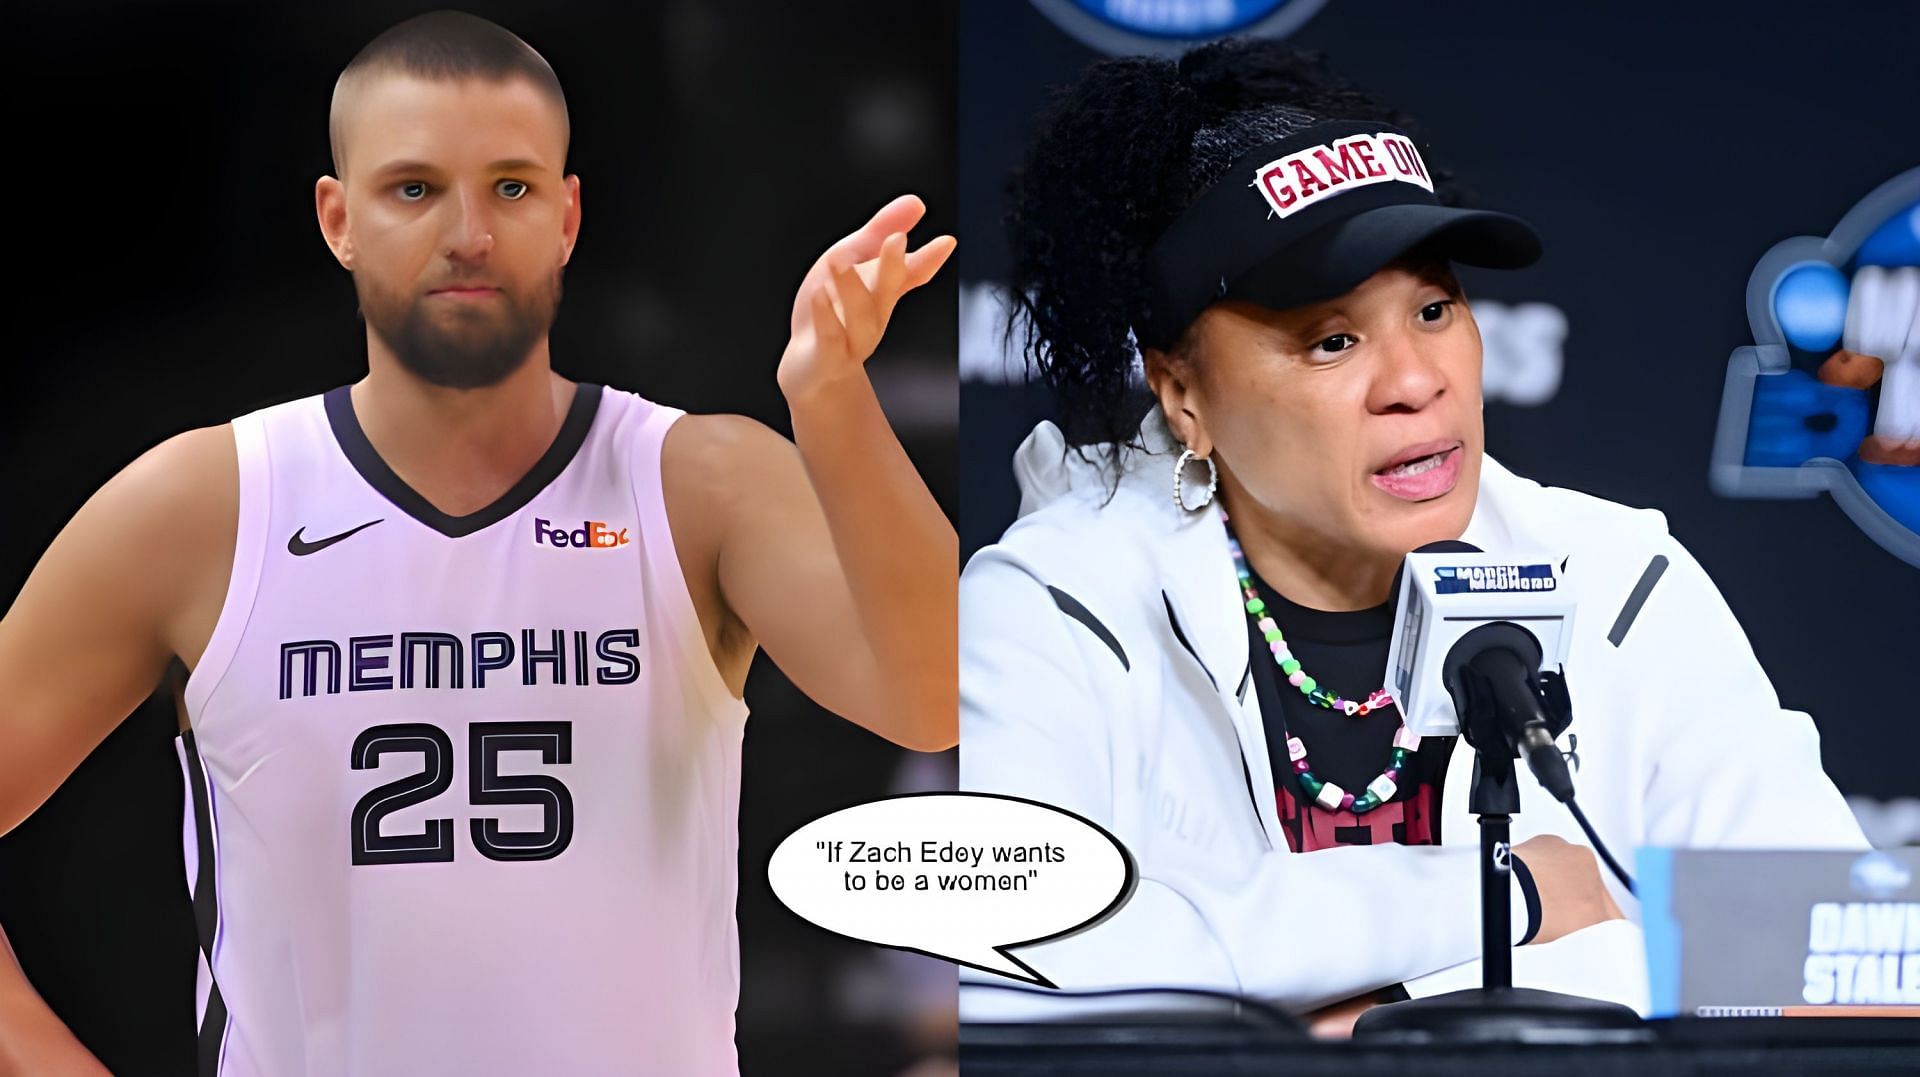 Chandler Parsons challenged Dawn Staley